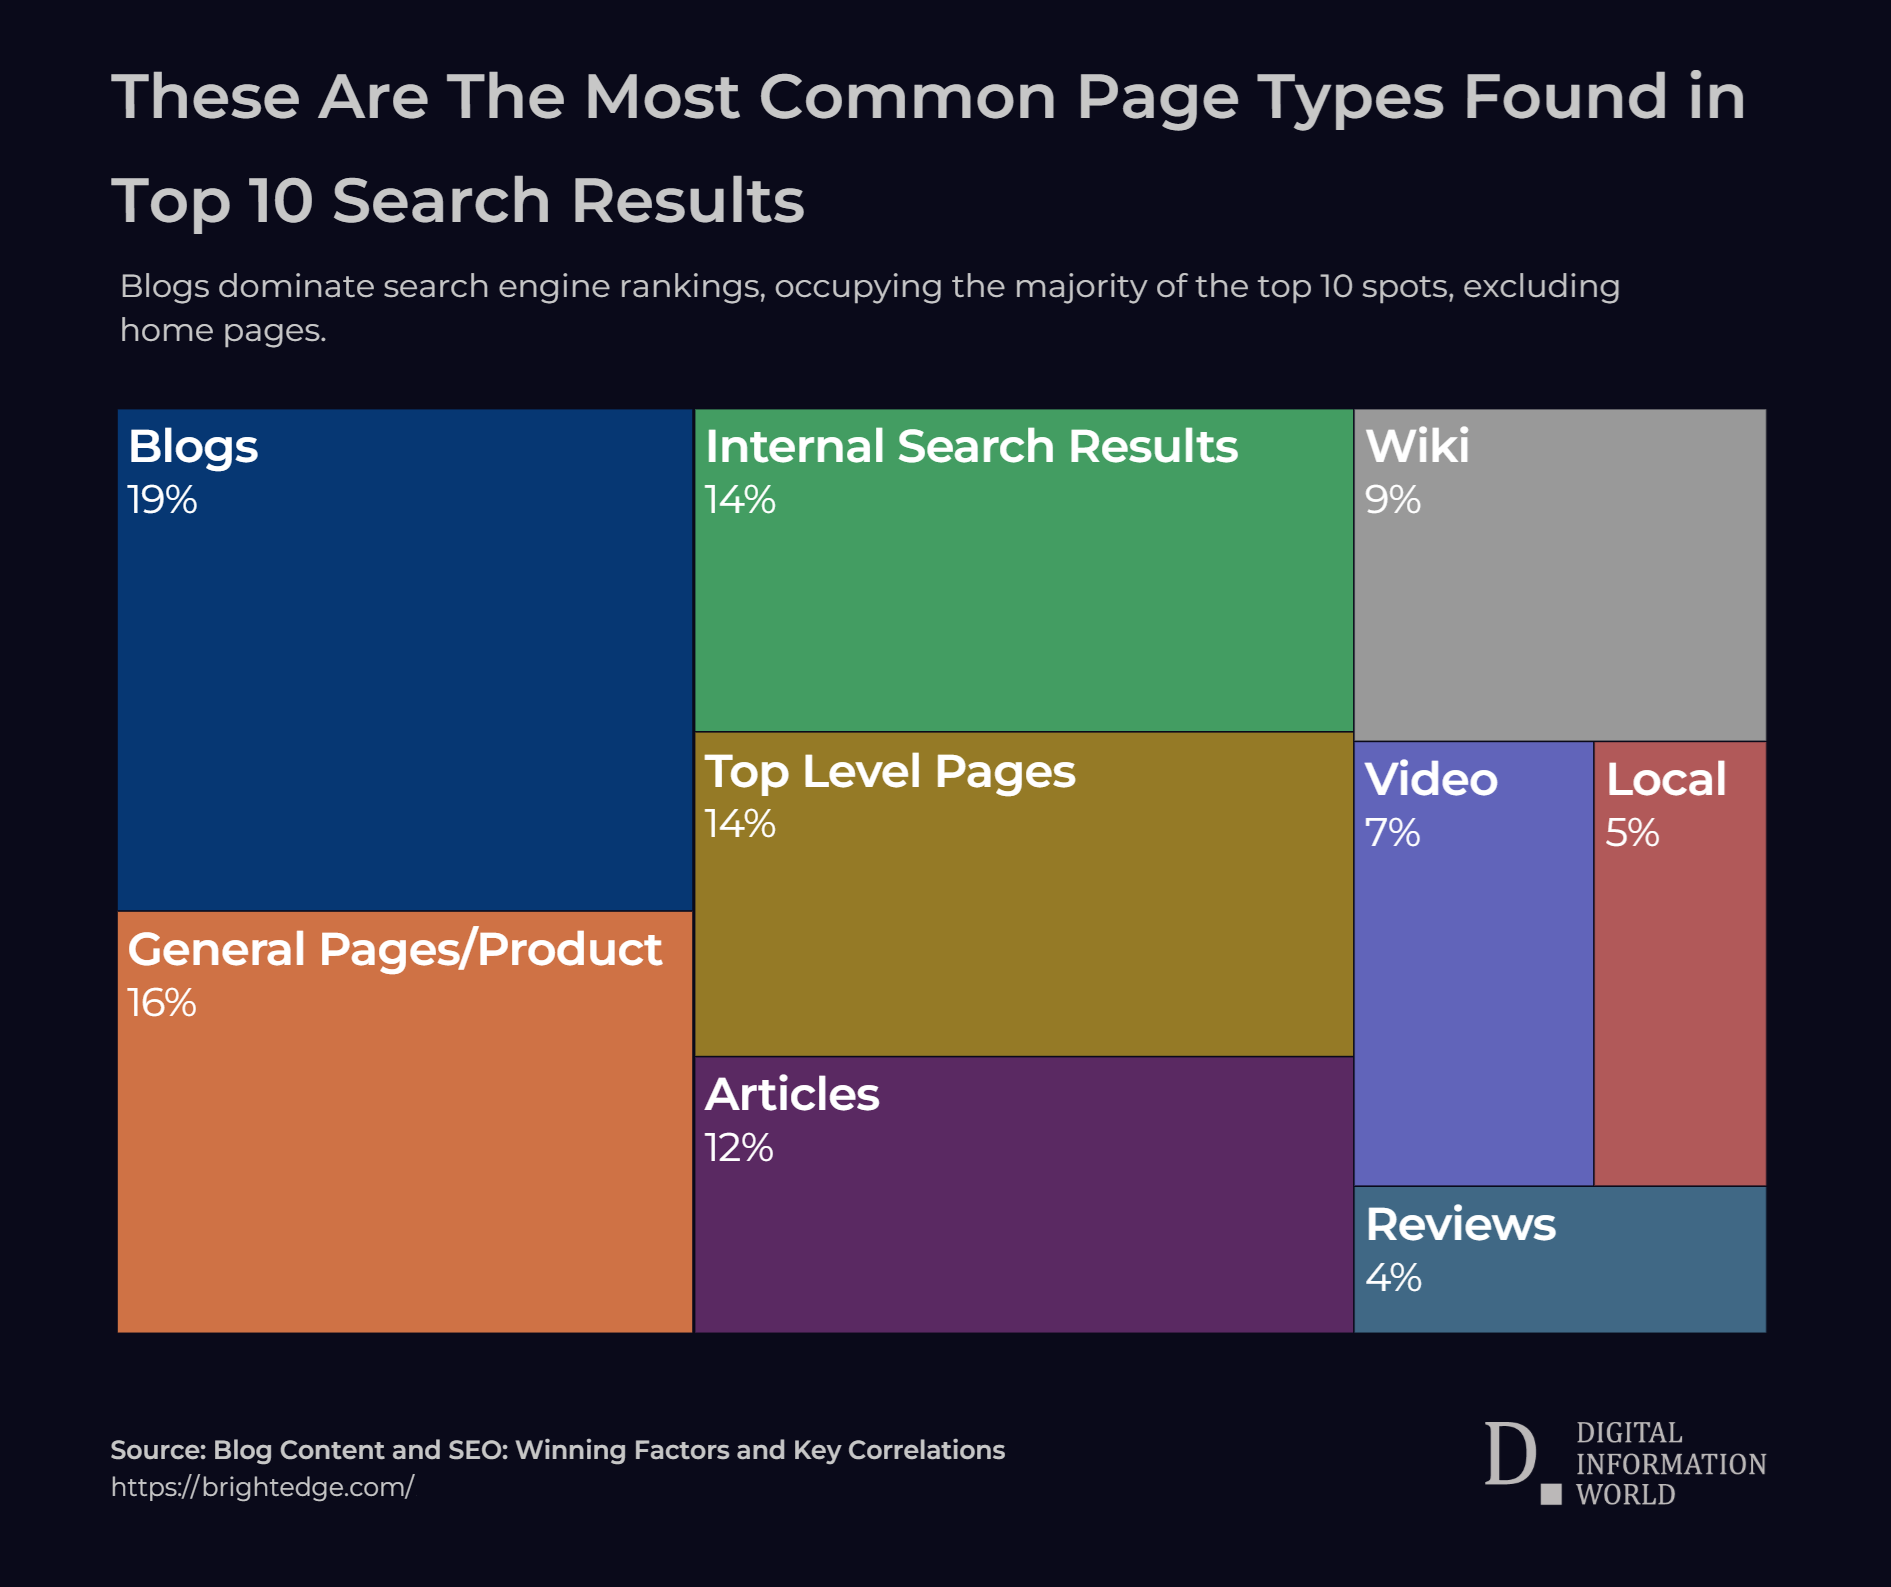 When you take a look at the sites that are most commonly ranked in the top ten, 19% happen to be blogs.